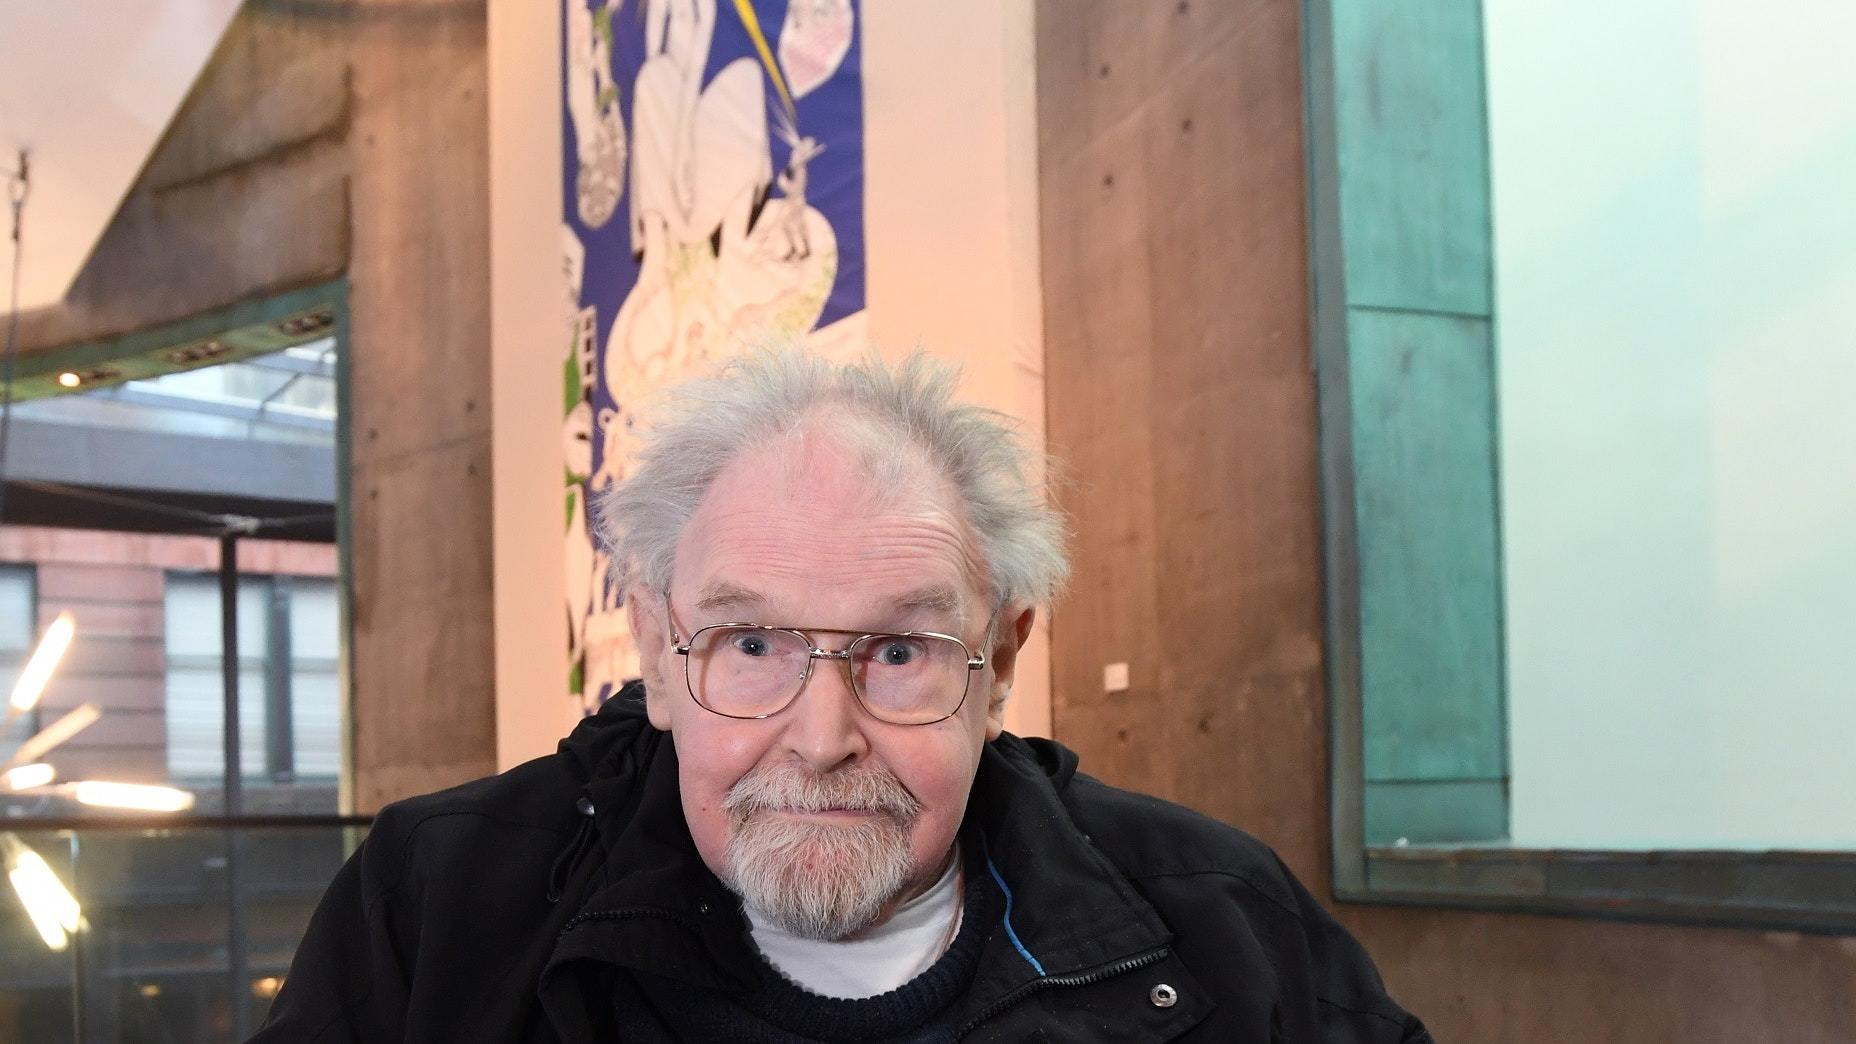 Alasdair Gray at the unveiling of the Facsimilization exhibition (Glasgow City Council/PA)